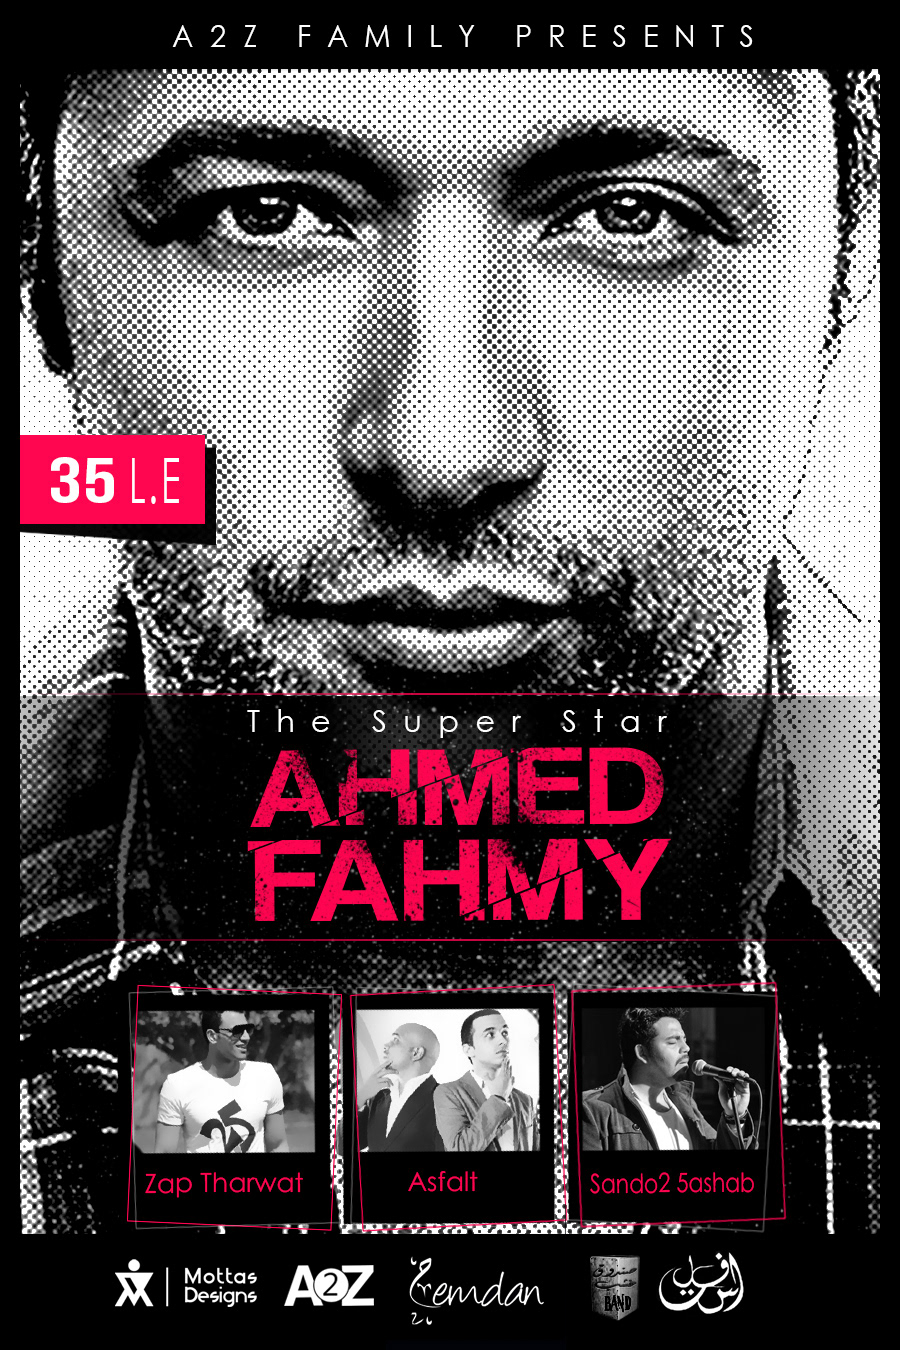 ahmed Ahmed Fahmi concer Event flyer black purple pink White Singing party